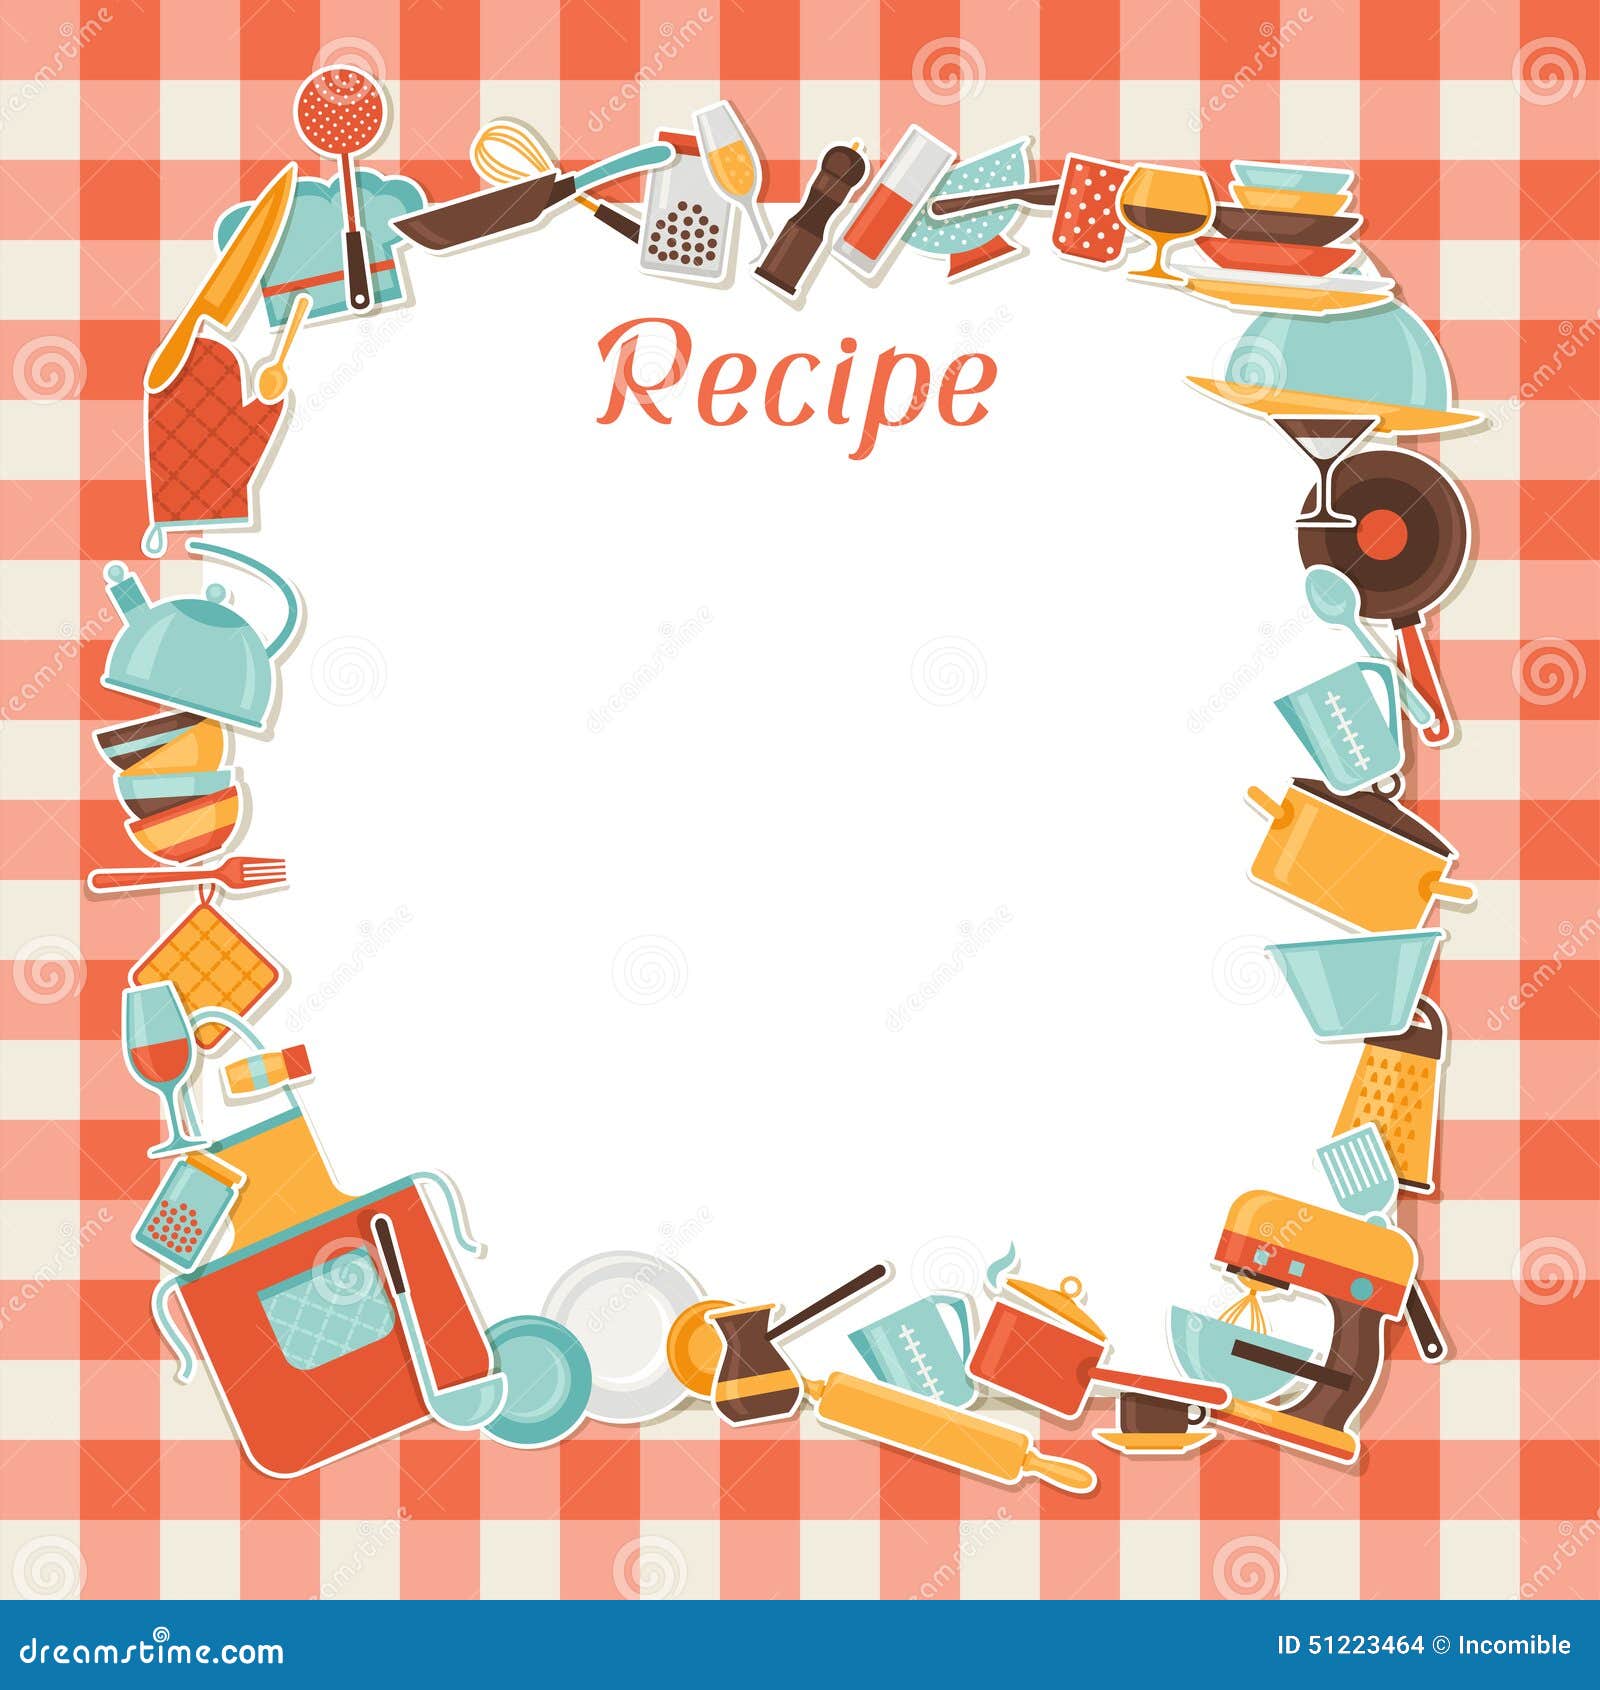  Recipe Background With Kitchen And Restaurant Stock Vector 